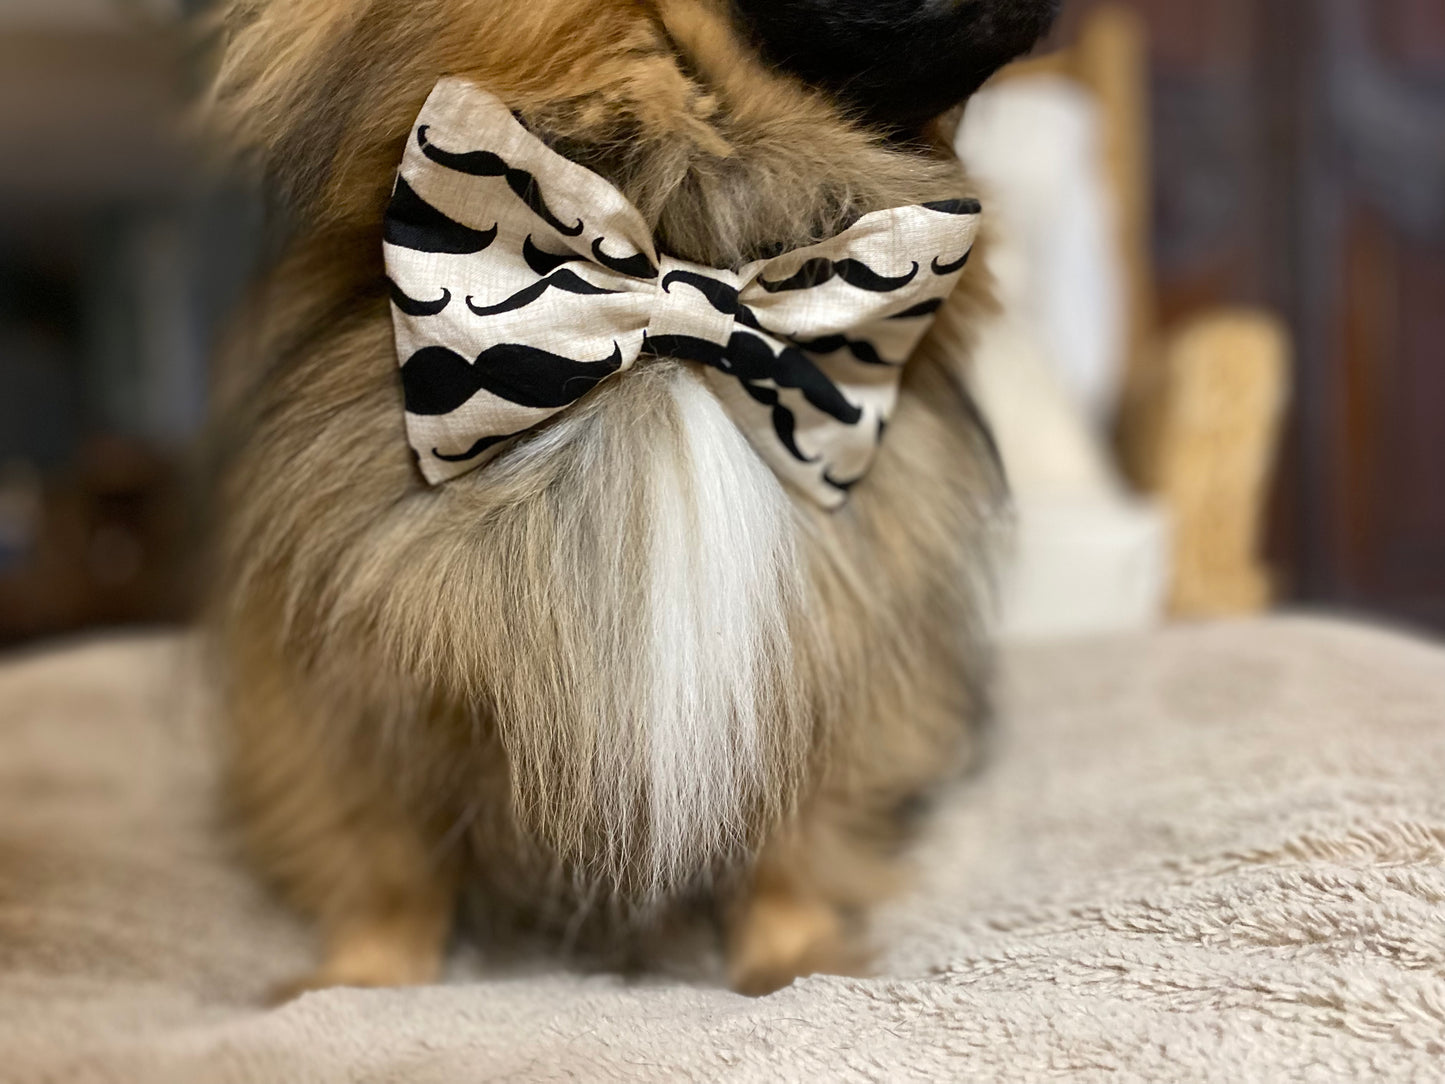 Dog Bow Tie, Donuts